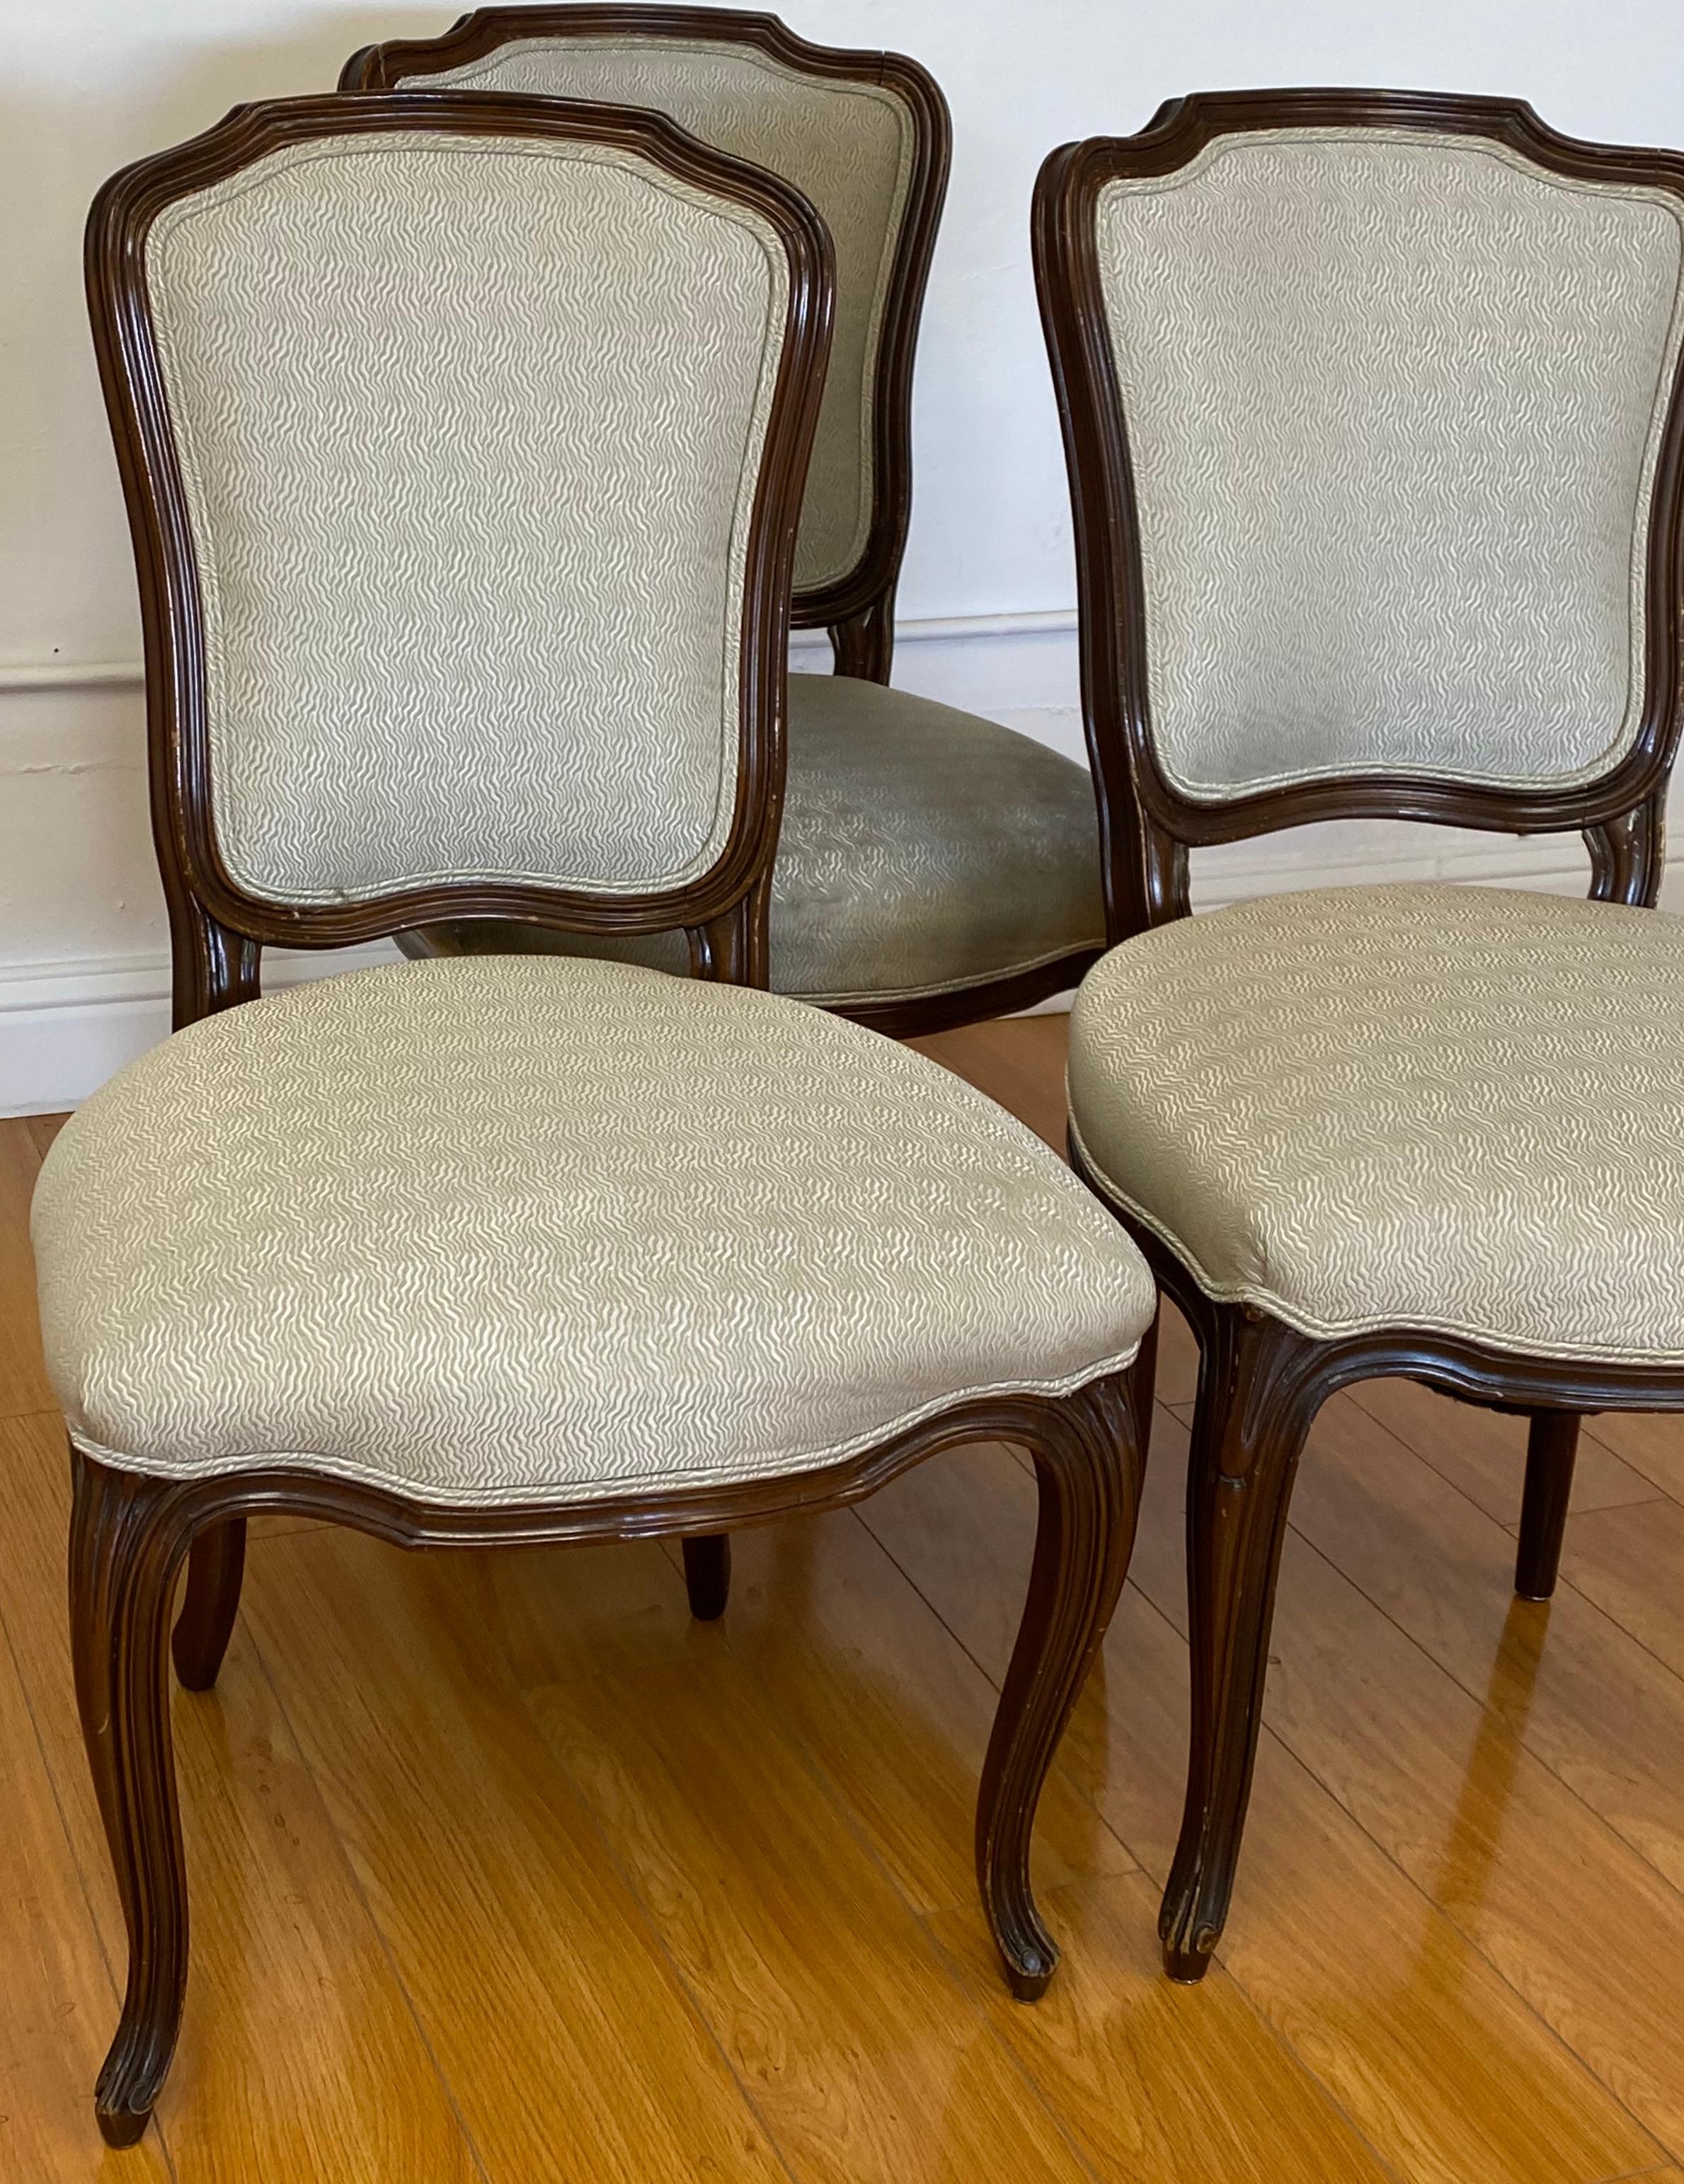 French Provincial Three Early 20th Century French Walnut Carved Side Chairs, circa 1900